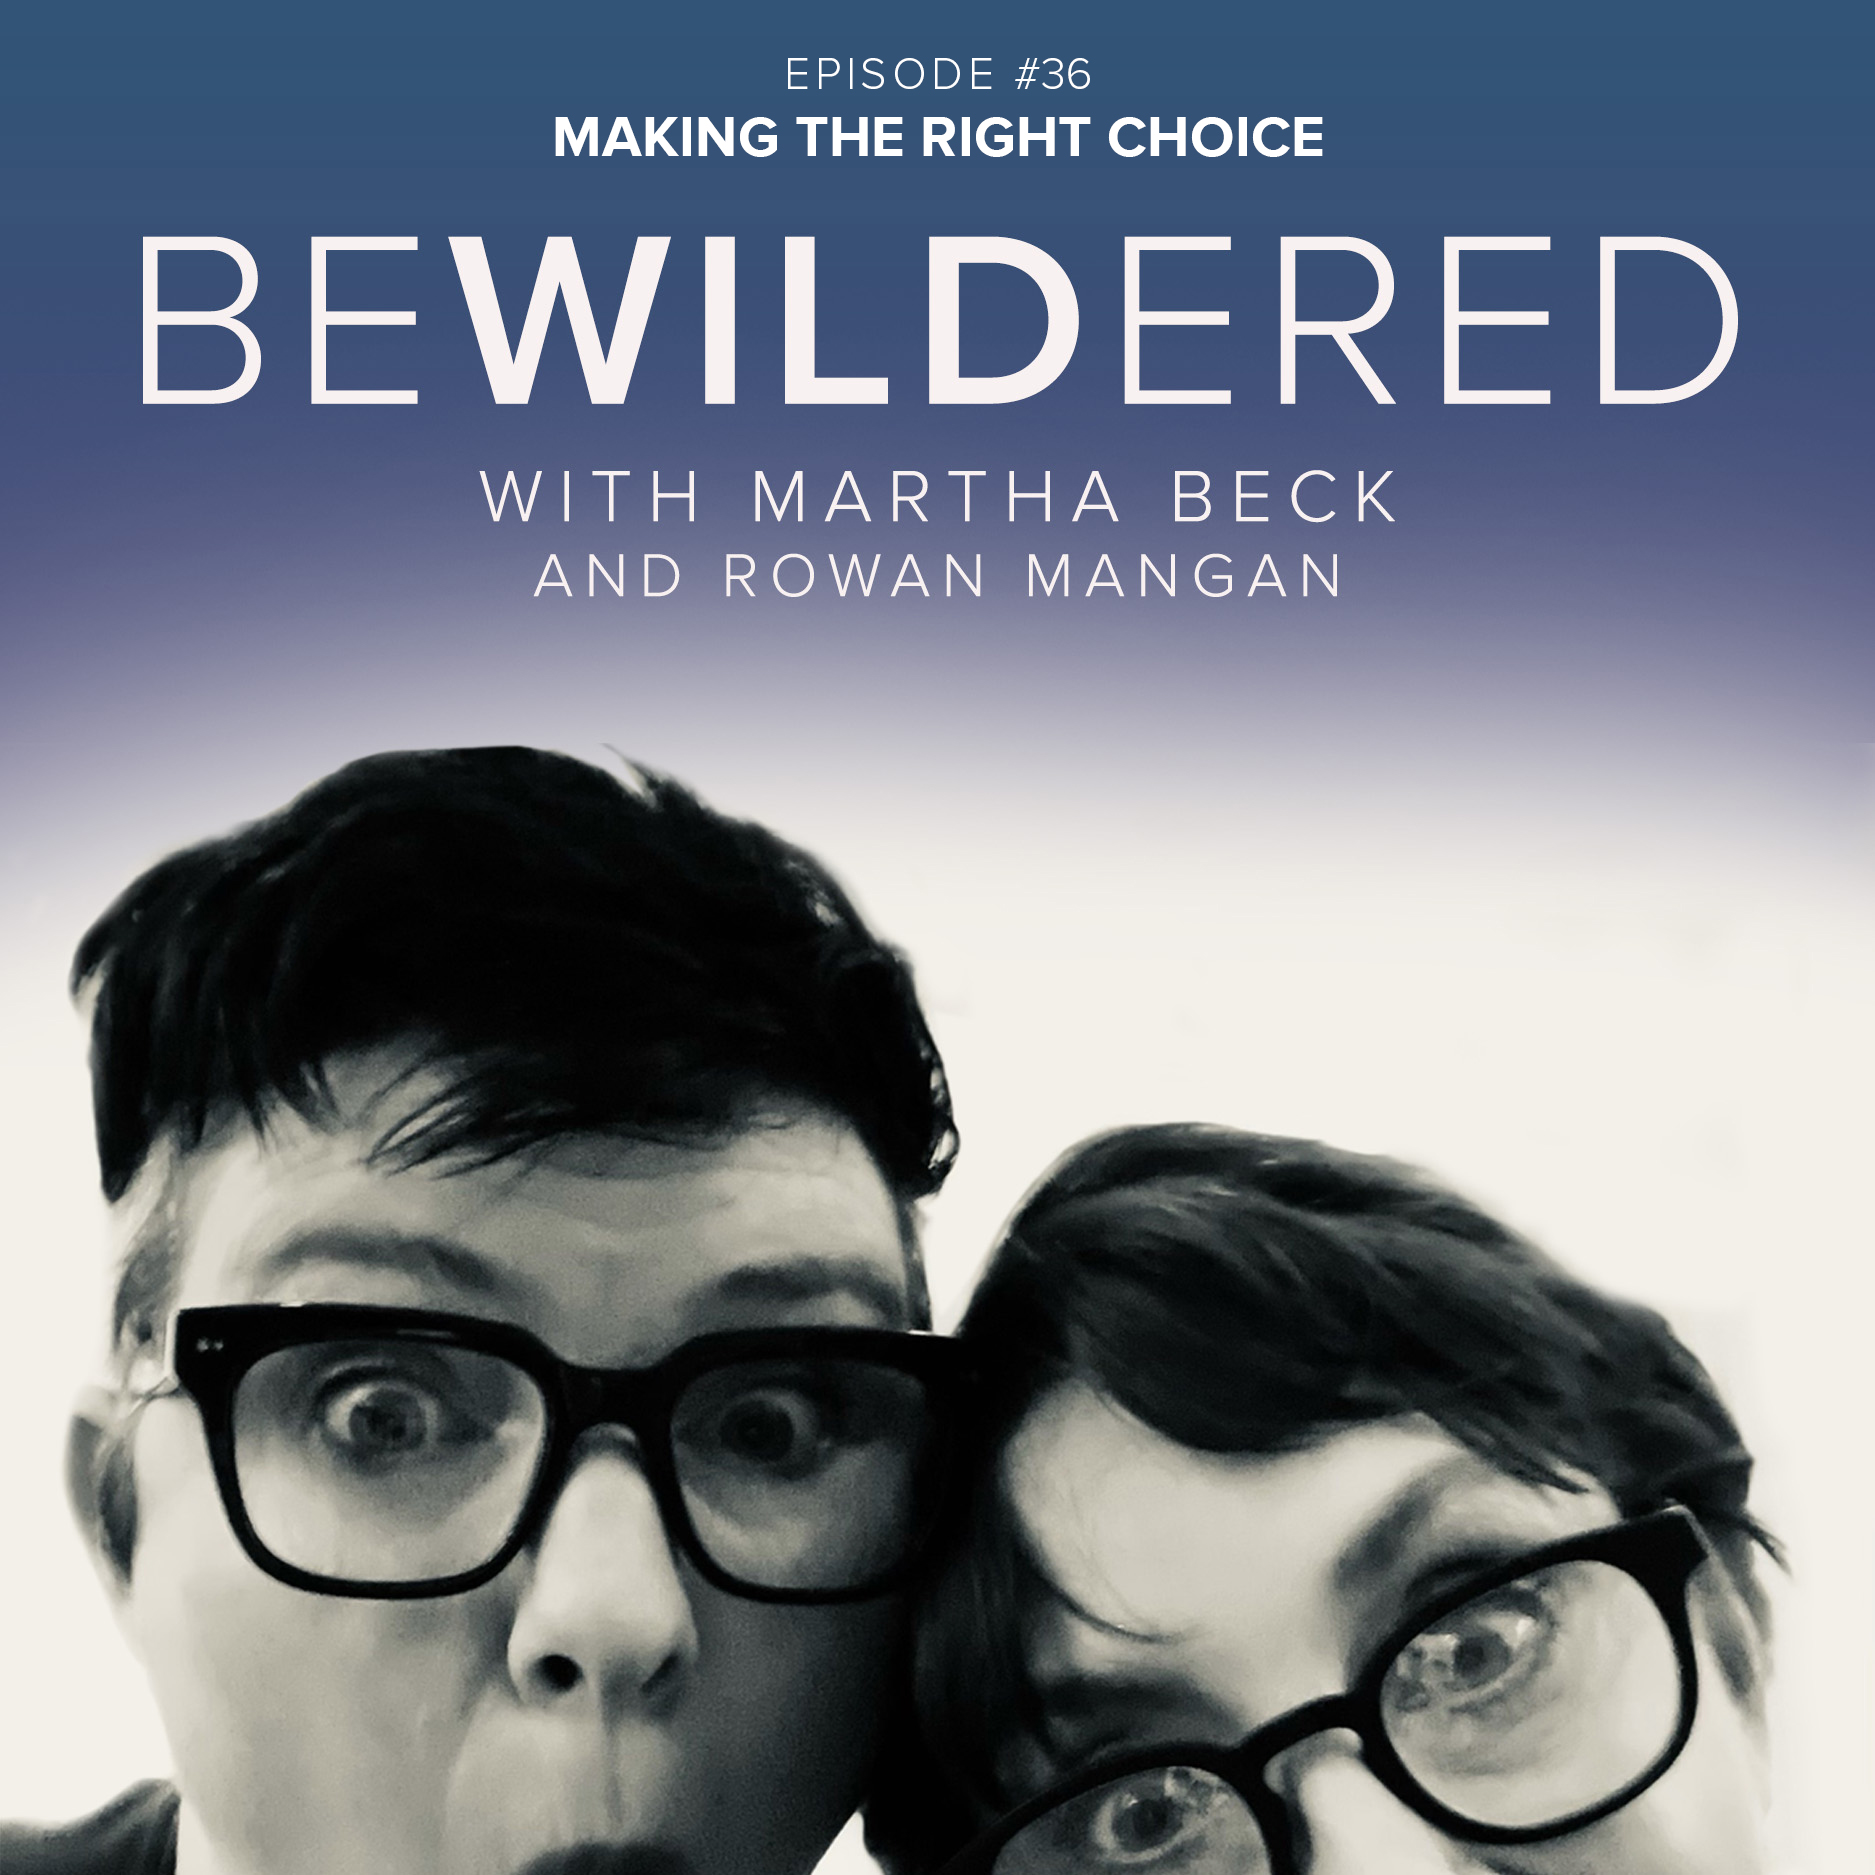 Image for Episode #36 Making the Right Choice for the Bewildered Podcast with Martha Beck and Rowan Mangan